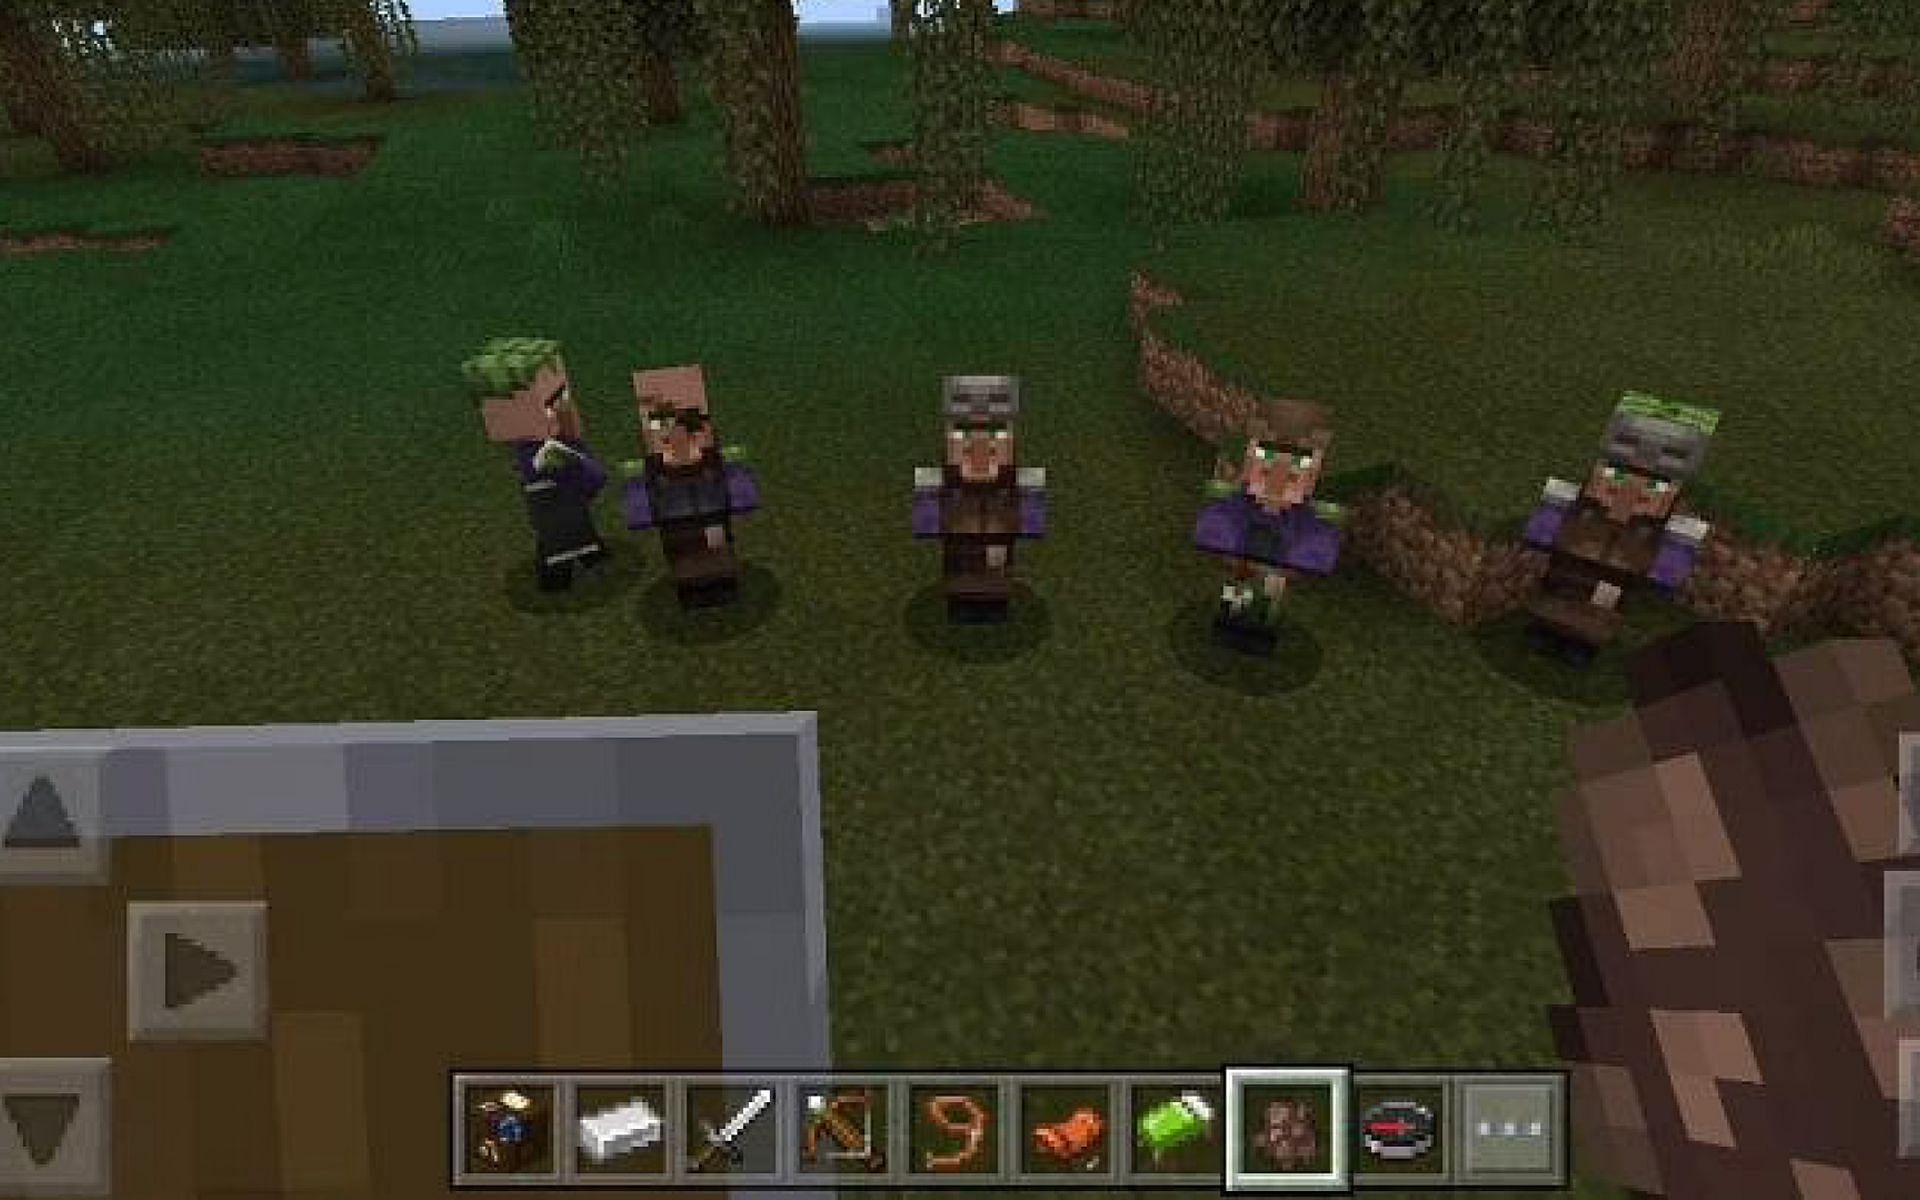 An image of several baby swamp villagers in-game (Image via Minecraft)